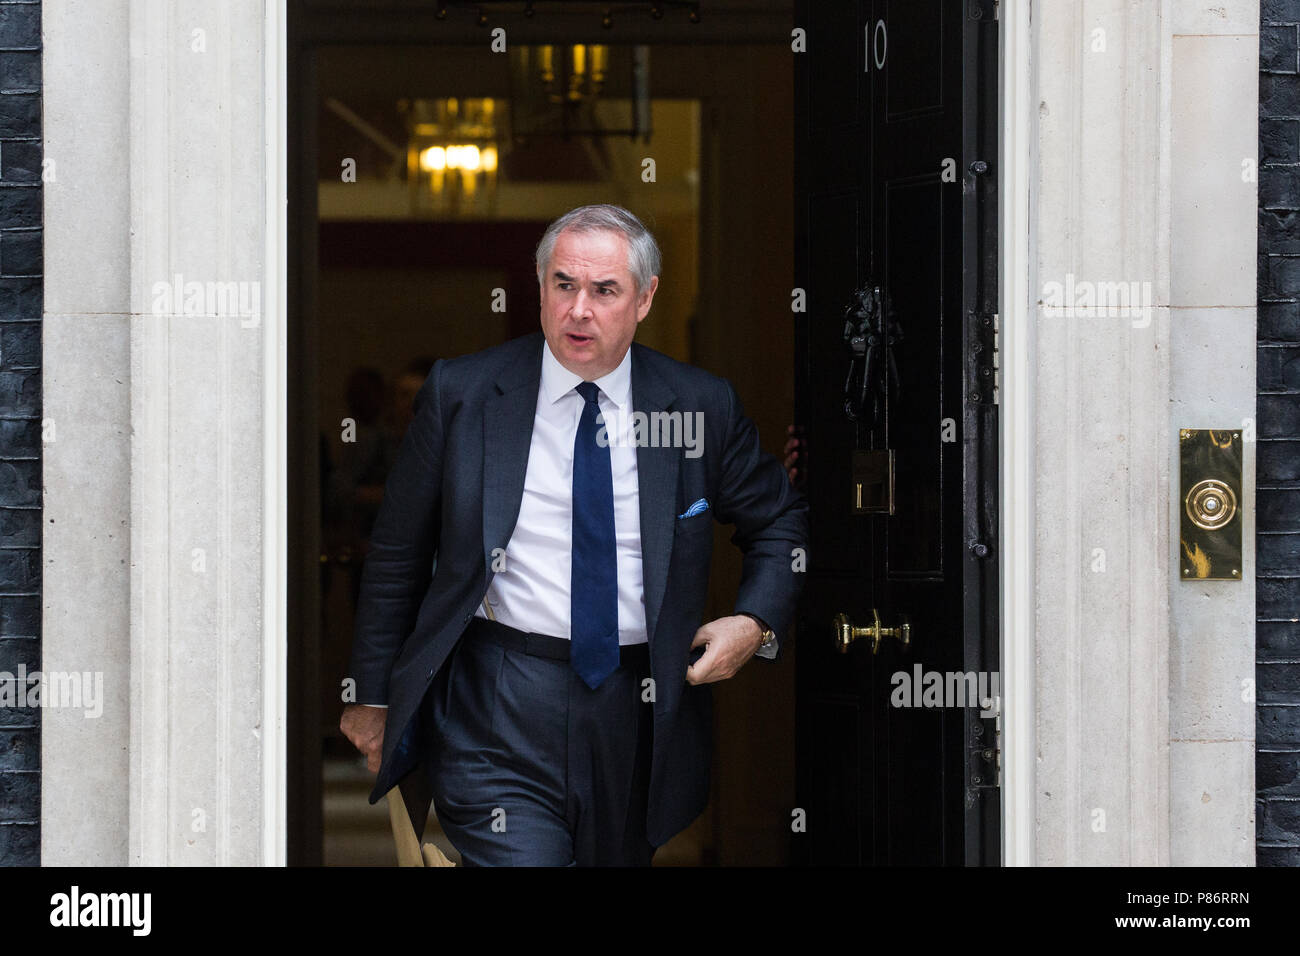 London, UK. 10th July, 2018. Geoffrey Cox QC MP, Attorney General, leaves 10 Downing Street following the first Cabinet meeting since the resignations as Ministers of David Davis MP and Boris Johnson MP. Credit: Mark Kerrison/Alamy Live News Stock Photo